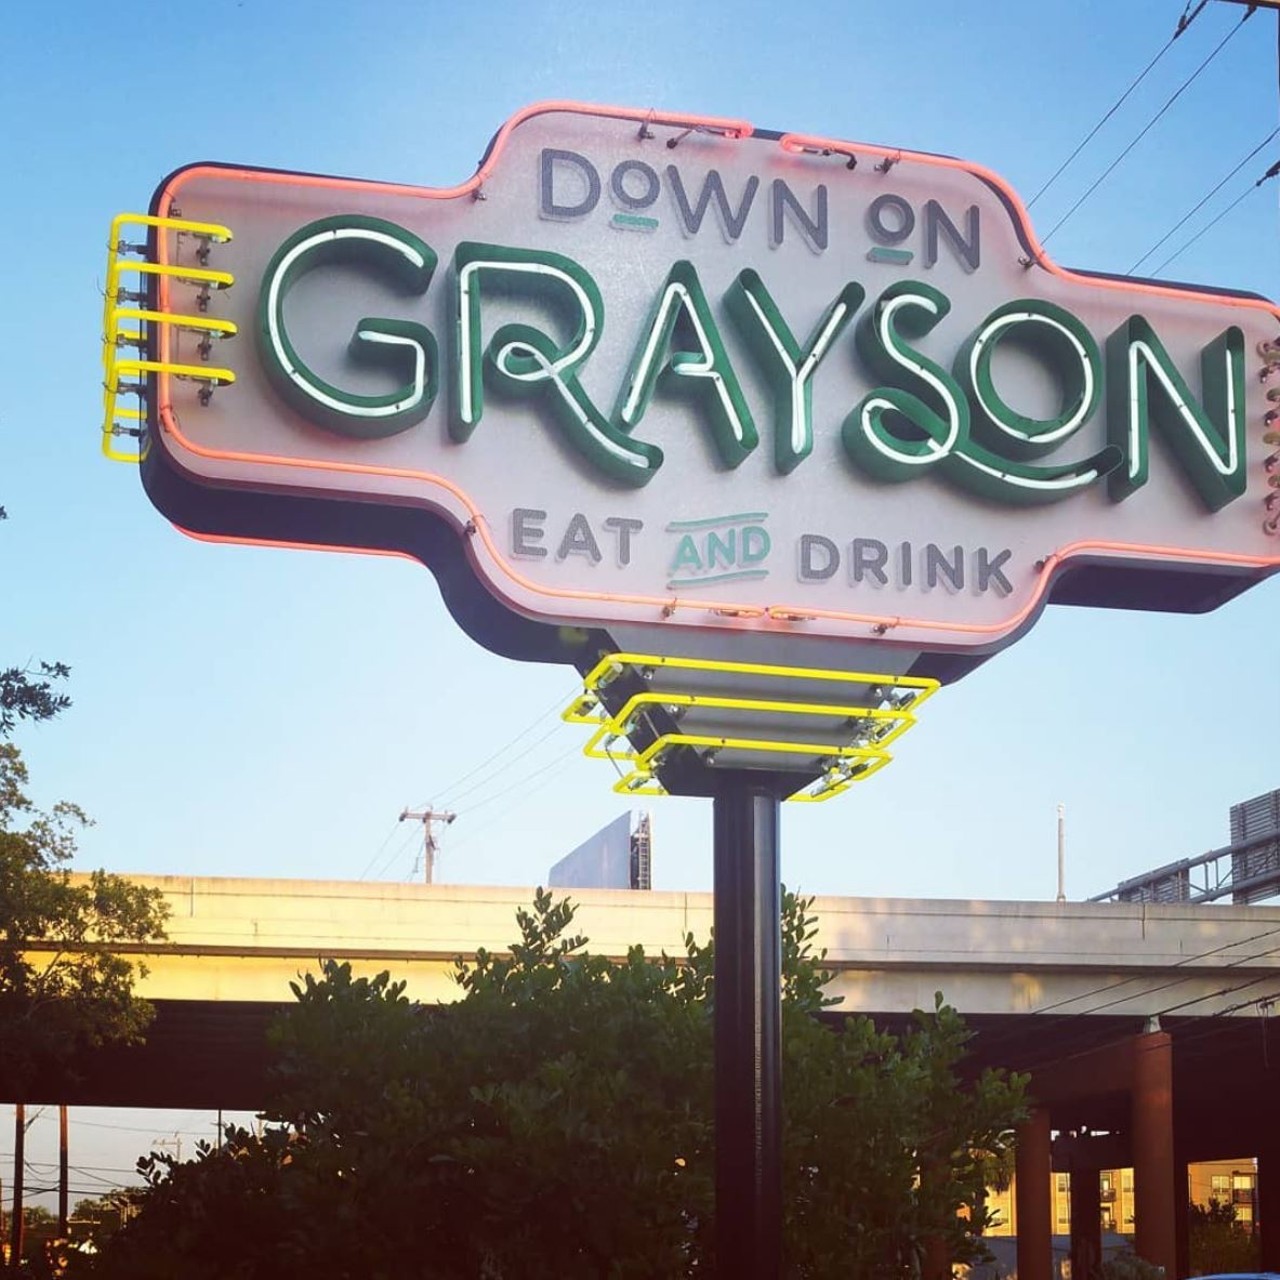 Down on Grayson
303 E Grayson St, (210) 248-9244, downongrayson.com
Located near the Pearl, Down on Grayson is a slightly more upscale American food restaurant with a huge patio dining area under the shade of an oak tree. Have your wine and drink it too, right? 
Photo via Instagram / kafergie77